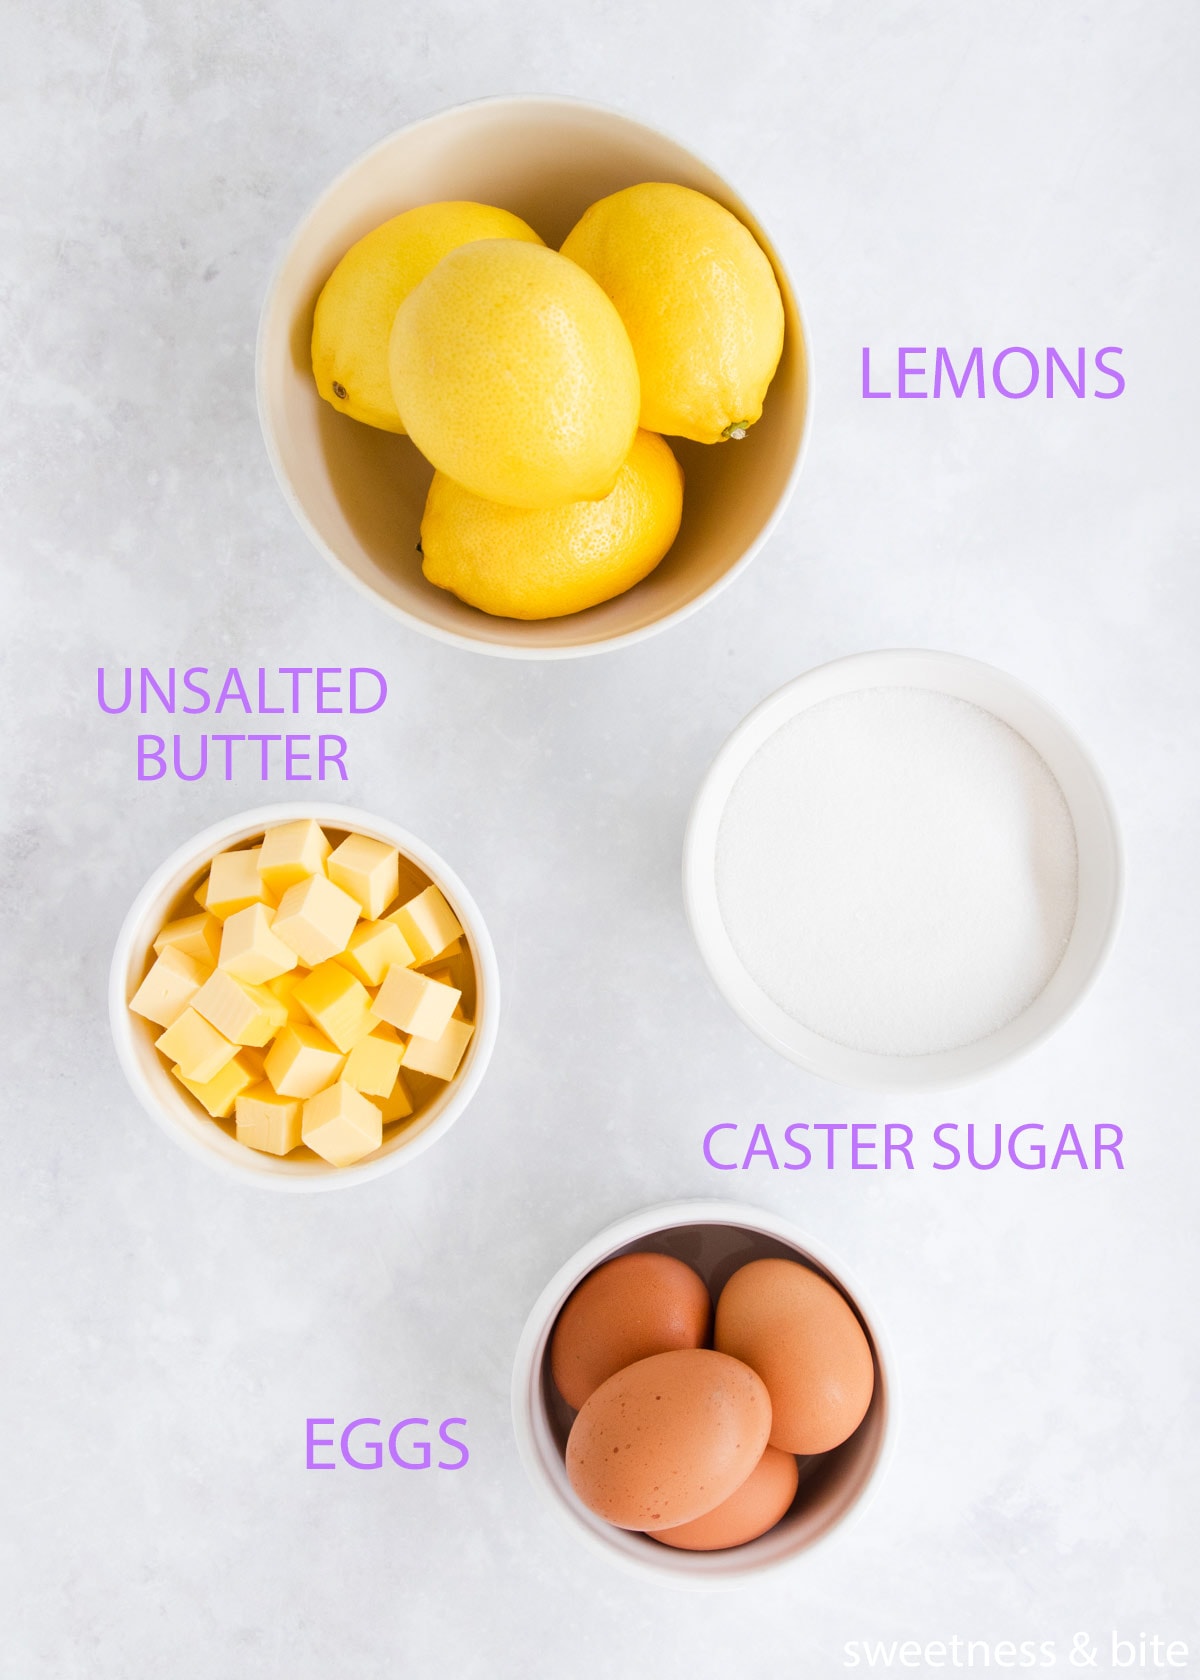 The lemon curd ingredients in white bowls on a grey background - lemons, butter, sugar and eggs.